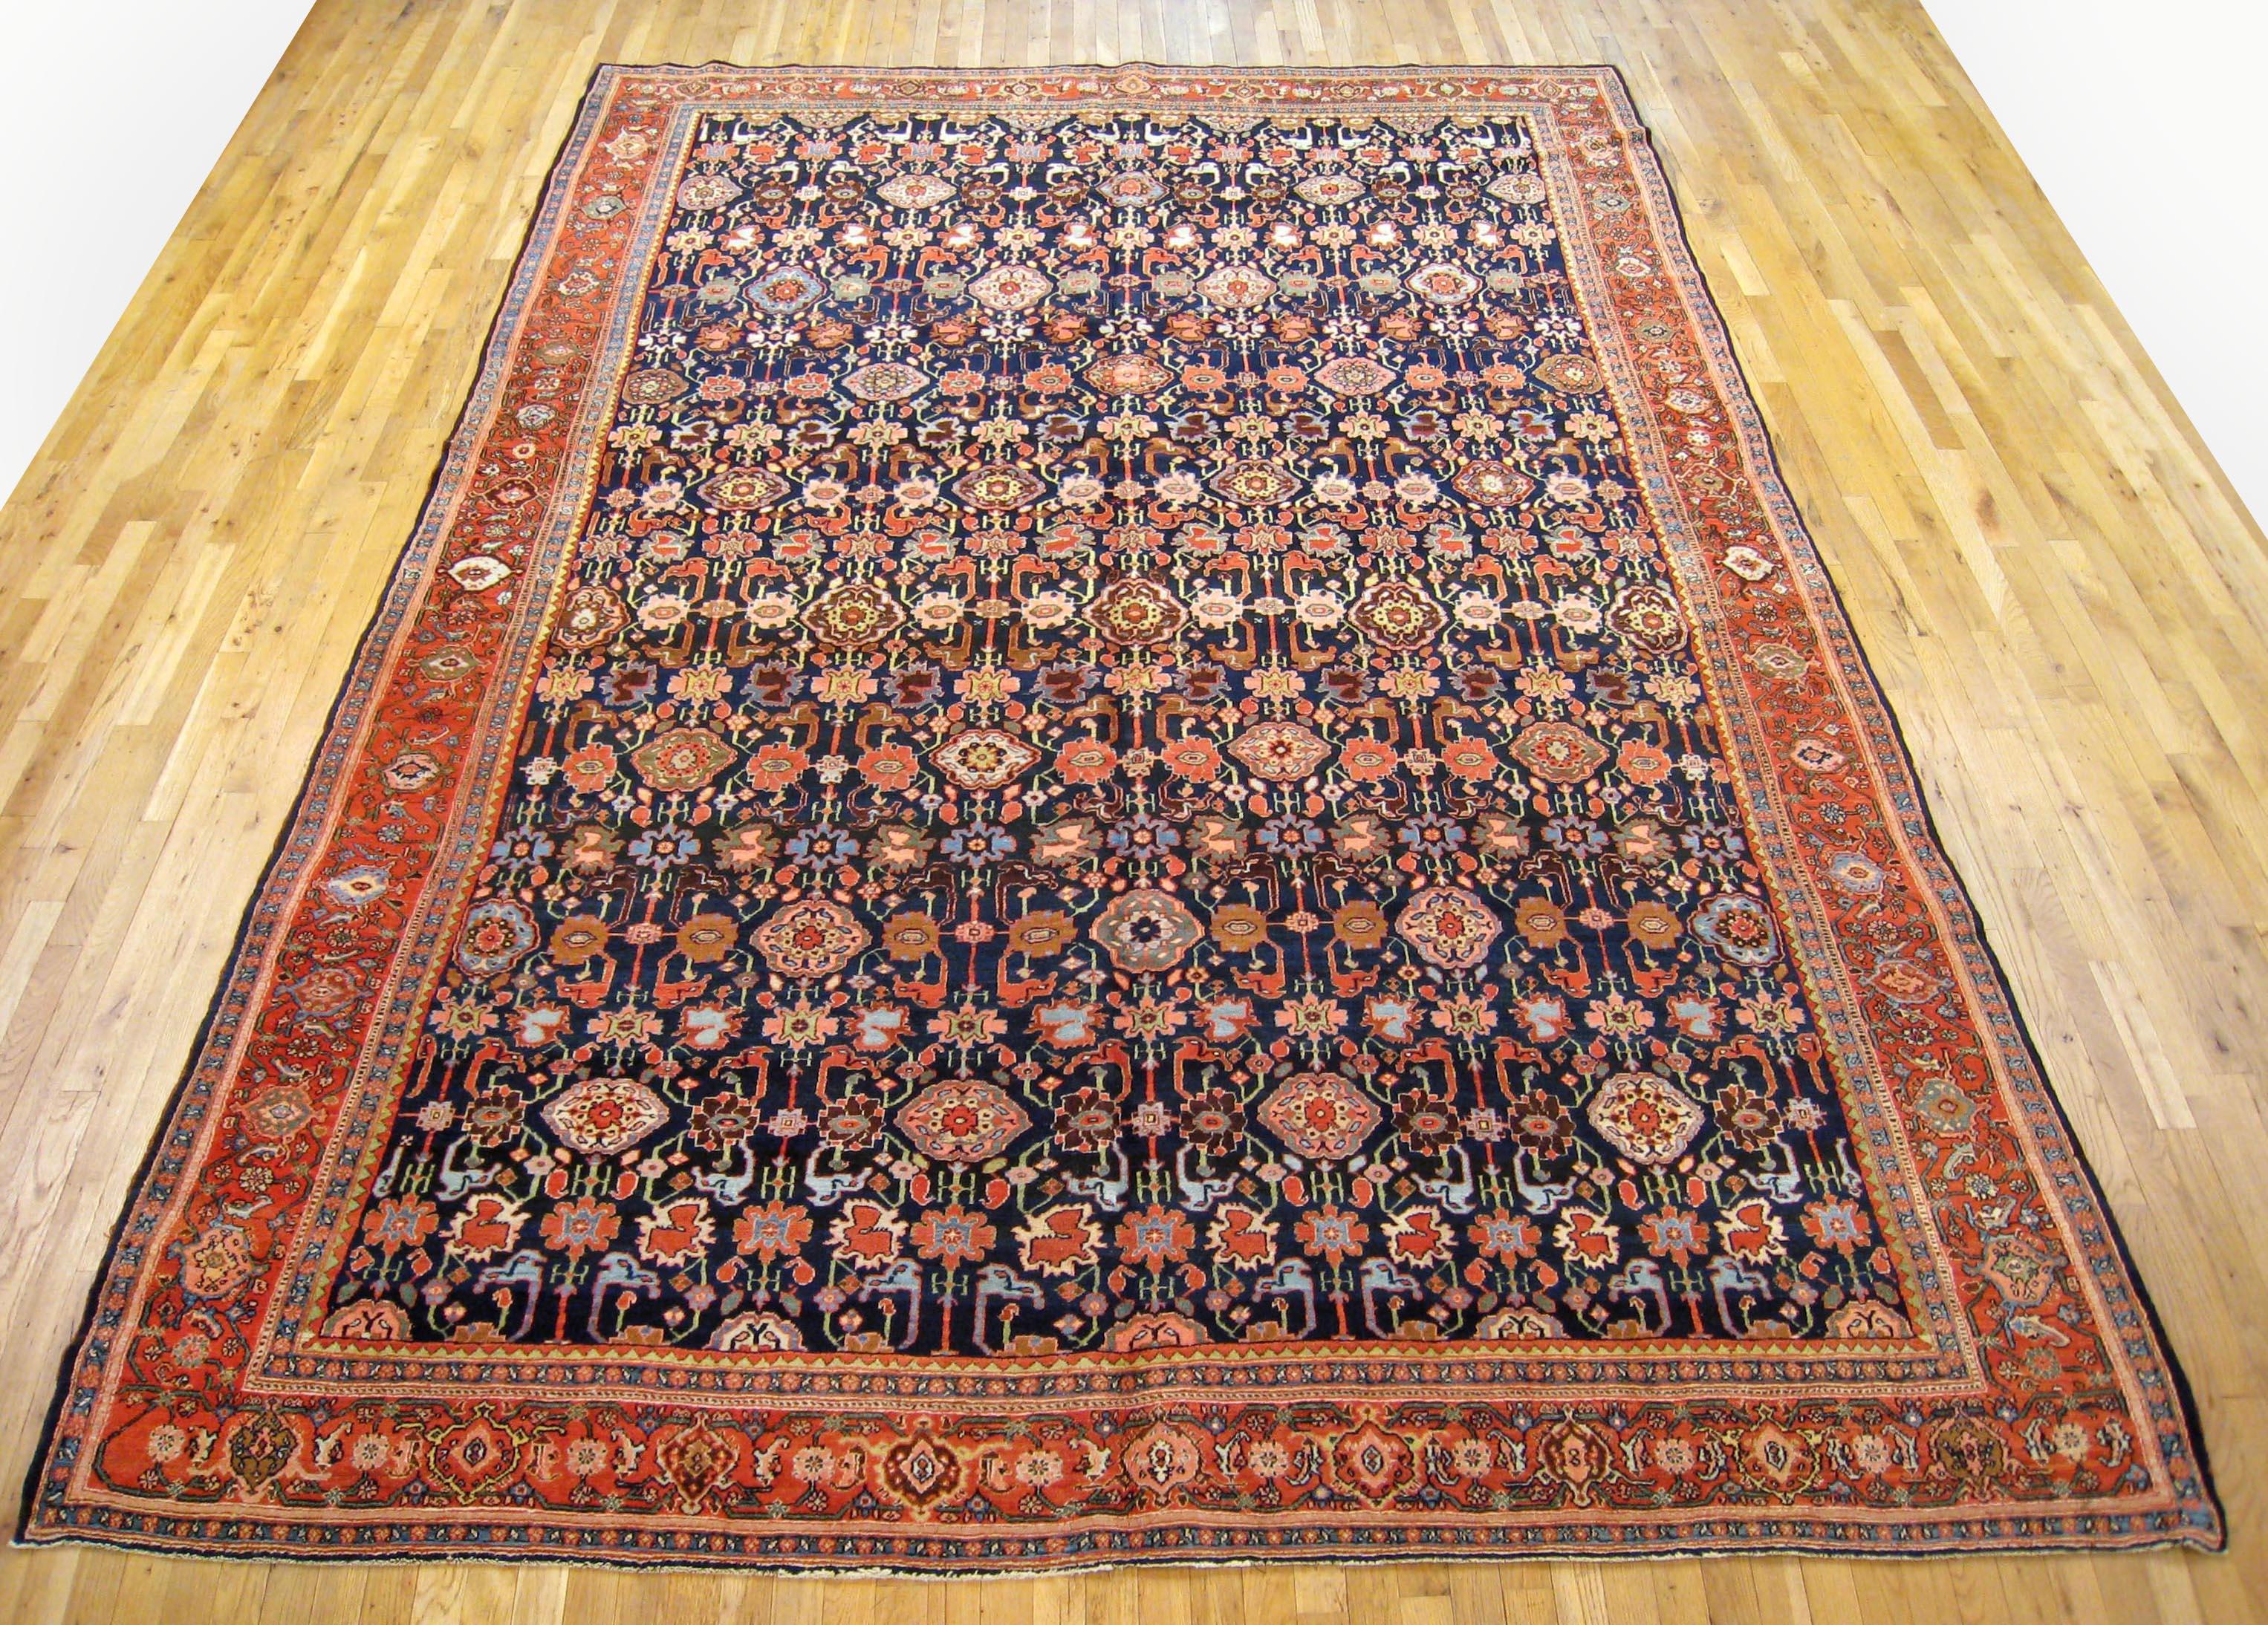 Antique Persian Bidjar rug, Room size, circa 1910

A one-of-a-kind antique Persian Bidjar Oriental Carpet, hand-knotted with soft wool pile. This beautiful rug features a repeating florettes design, on the navy primary field, with a red outer